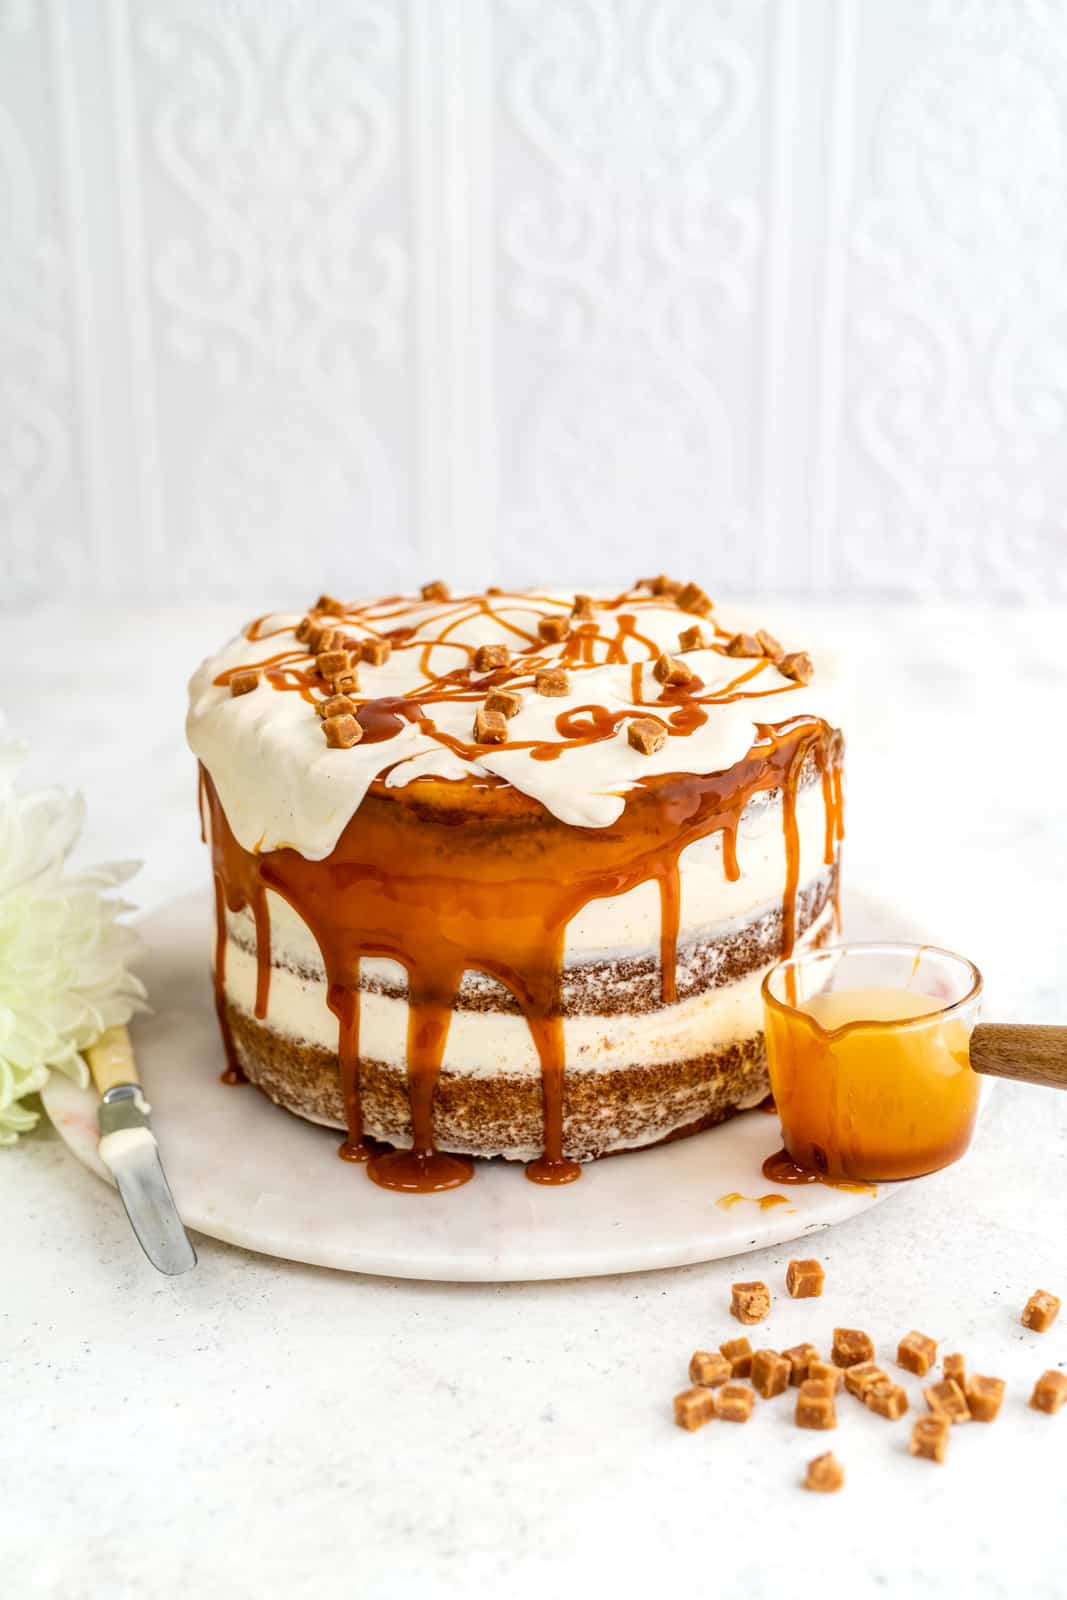 Banana Layer Cake with caramel cream cheese frosting drizzled with caramel on a marble cake plate